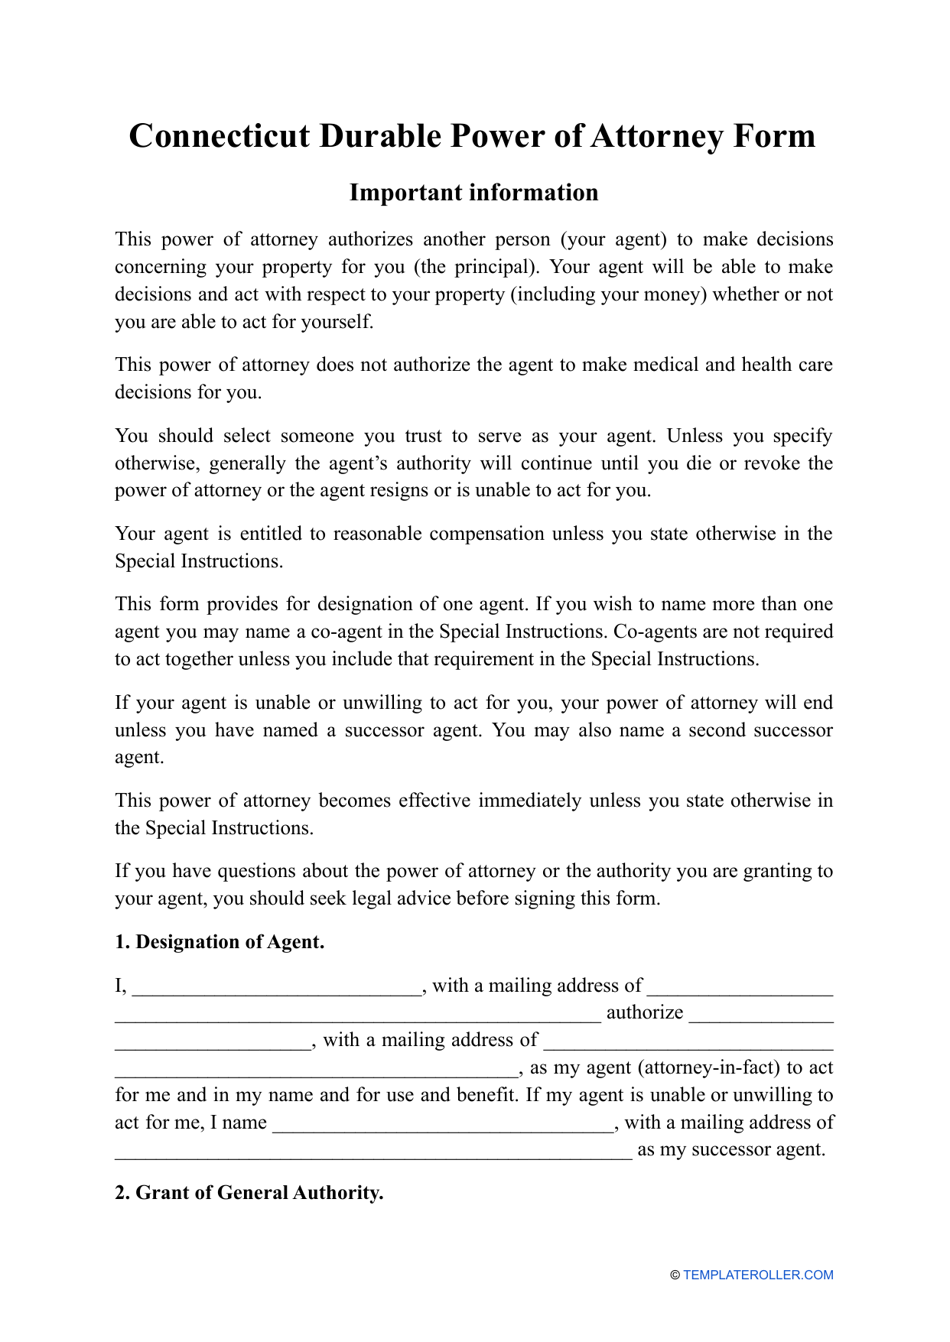 Durable Power of Attorney Form - Connecticut, Page 1